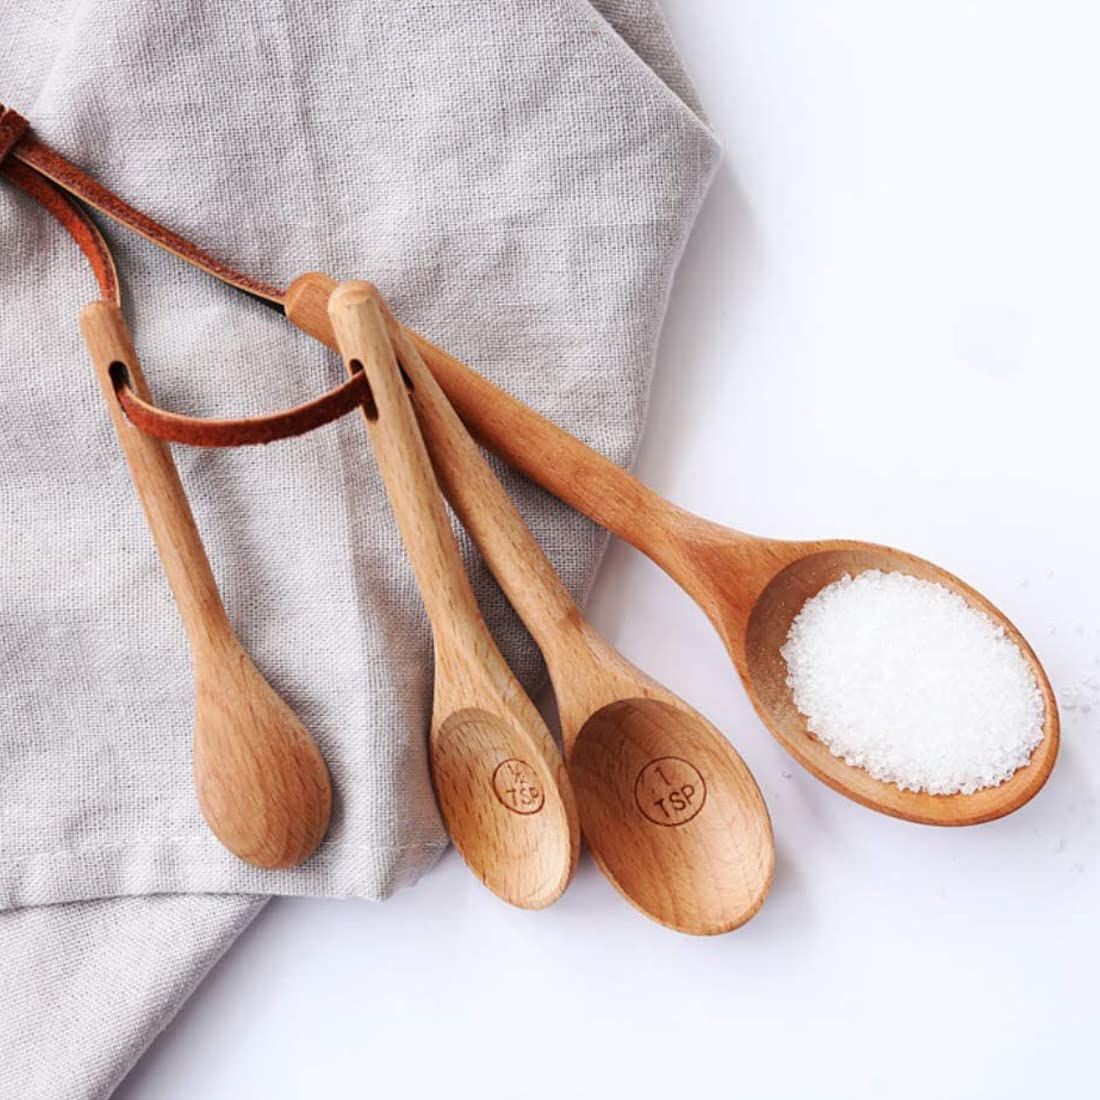 Three D Wooden Measuring Spoons by utensil, Engraved Accurate Spoons for Dry and Liquid Ingredients, | Amazon (US)